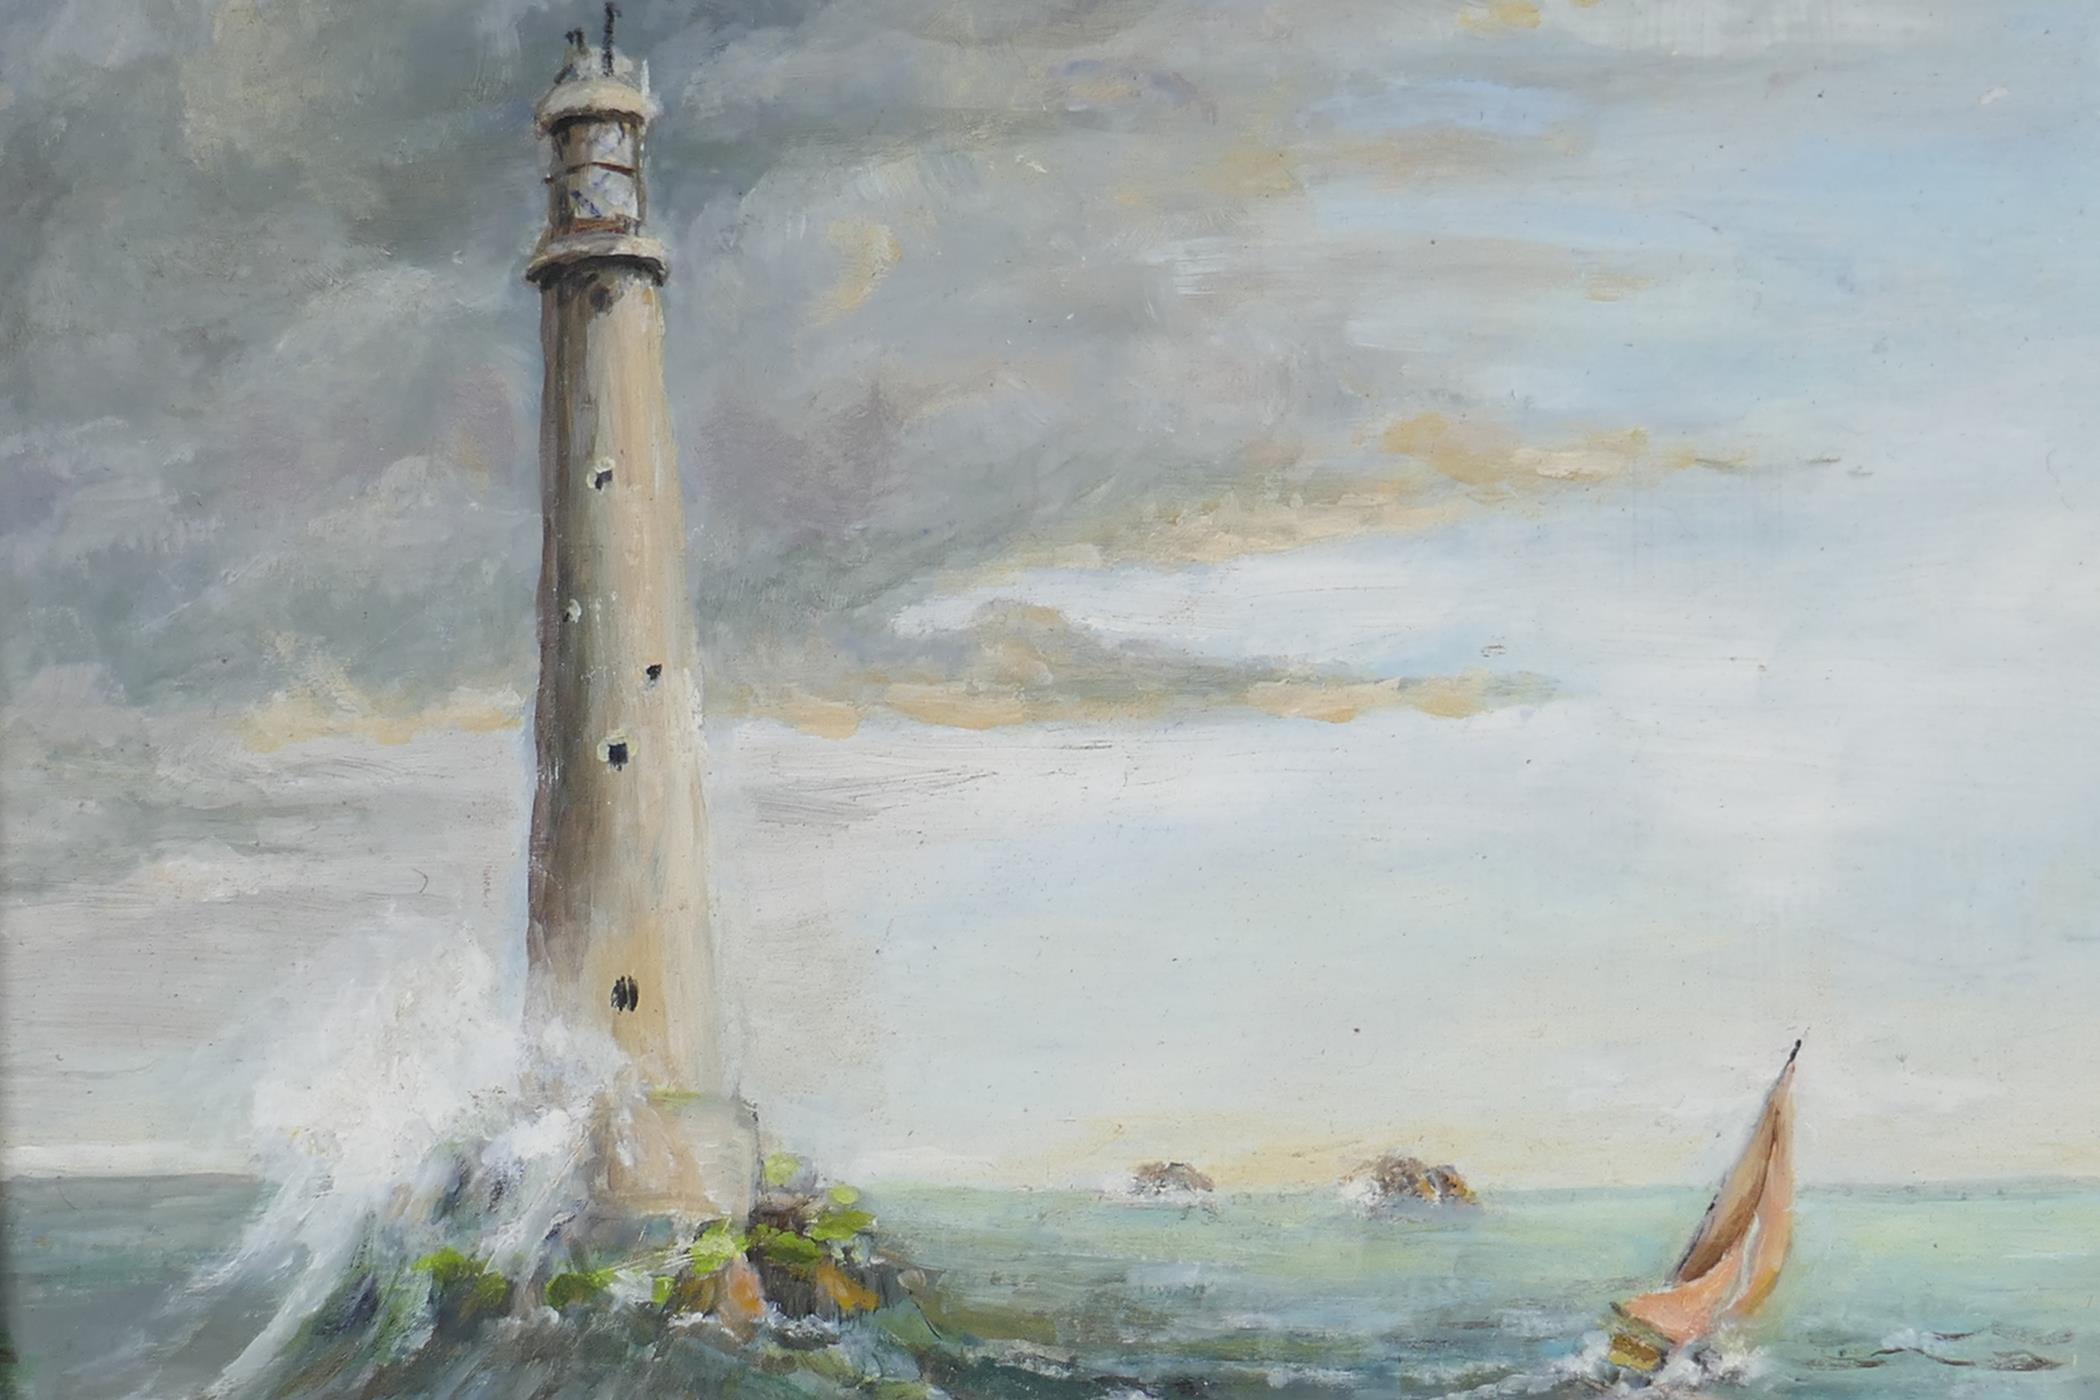 A light house and sailing ship in a stormy sea, titled verso "Bishops Rock Lighthouse", oil on